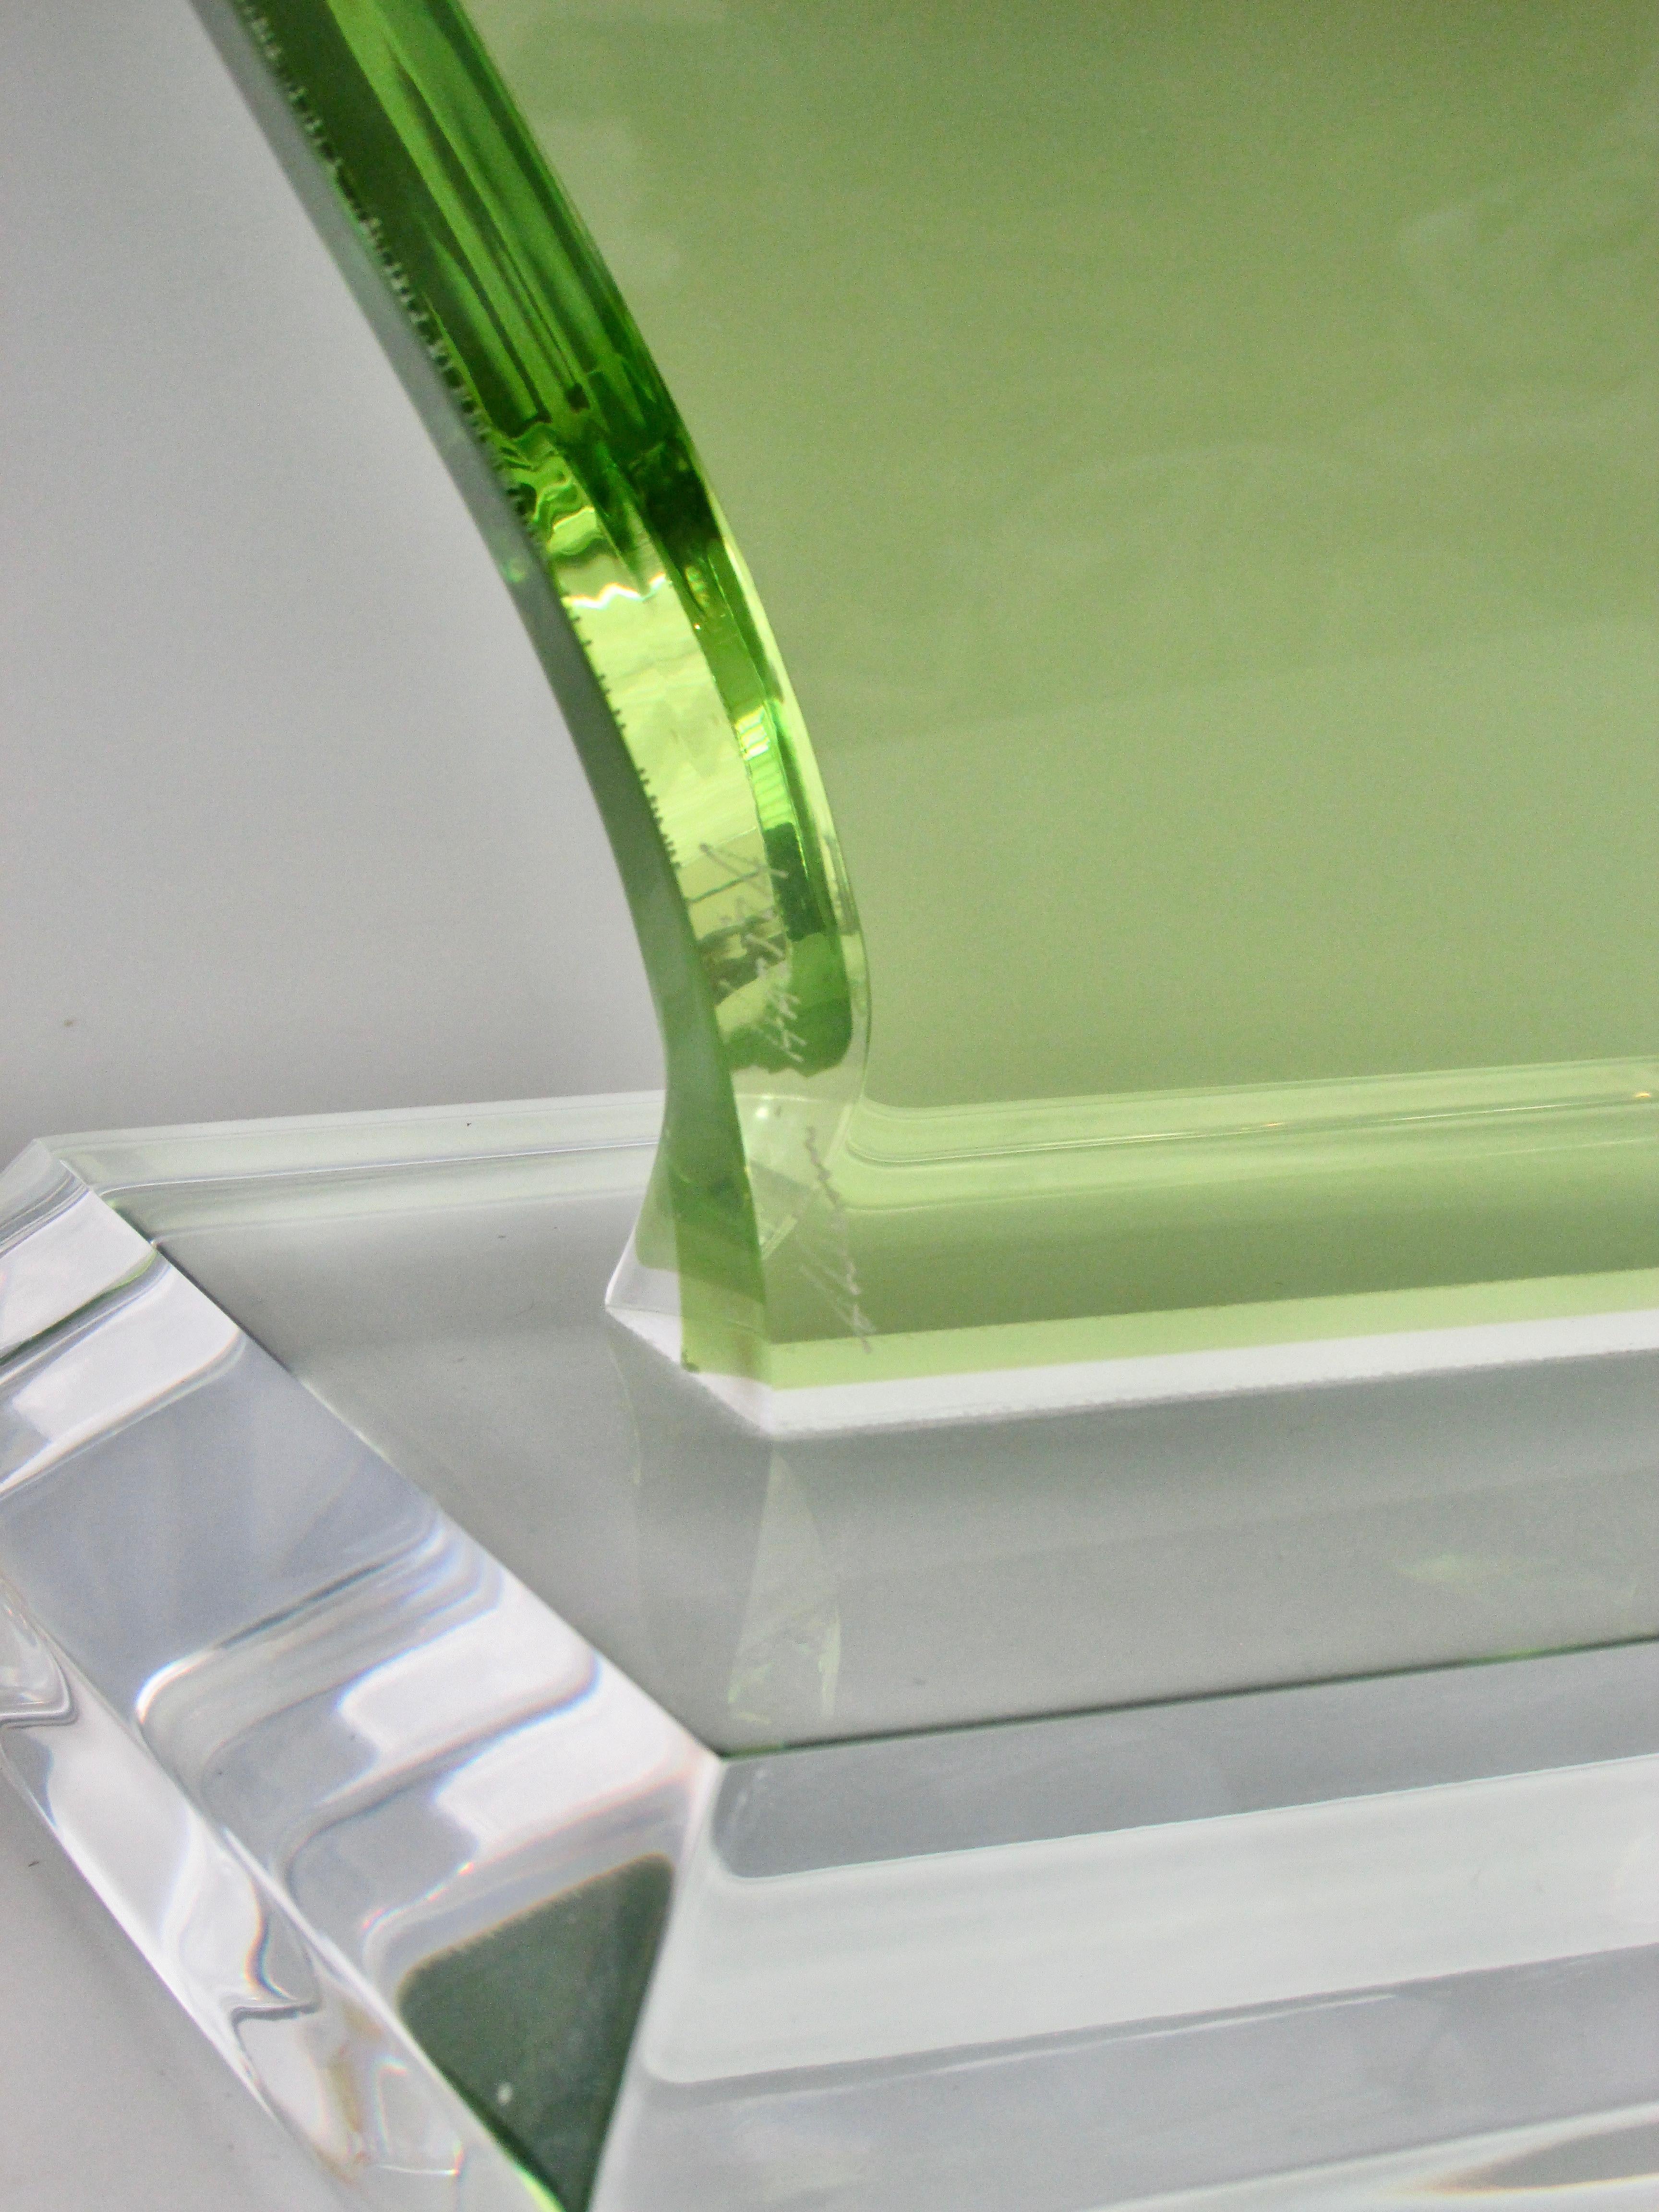 20th Century Green Lucite Sculpture on Clear Acrylic Base with Swirled Ball by Shlomi Haziza